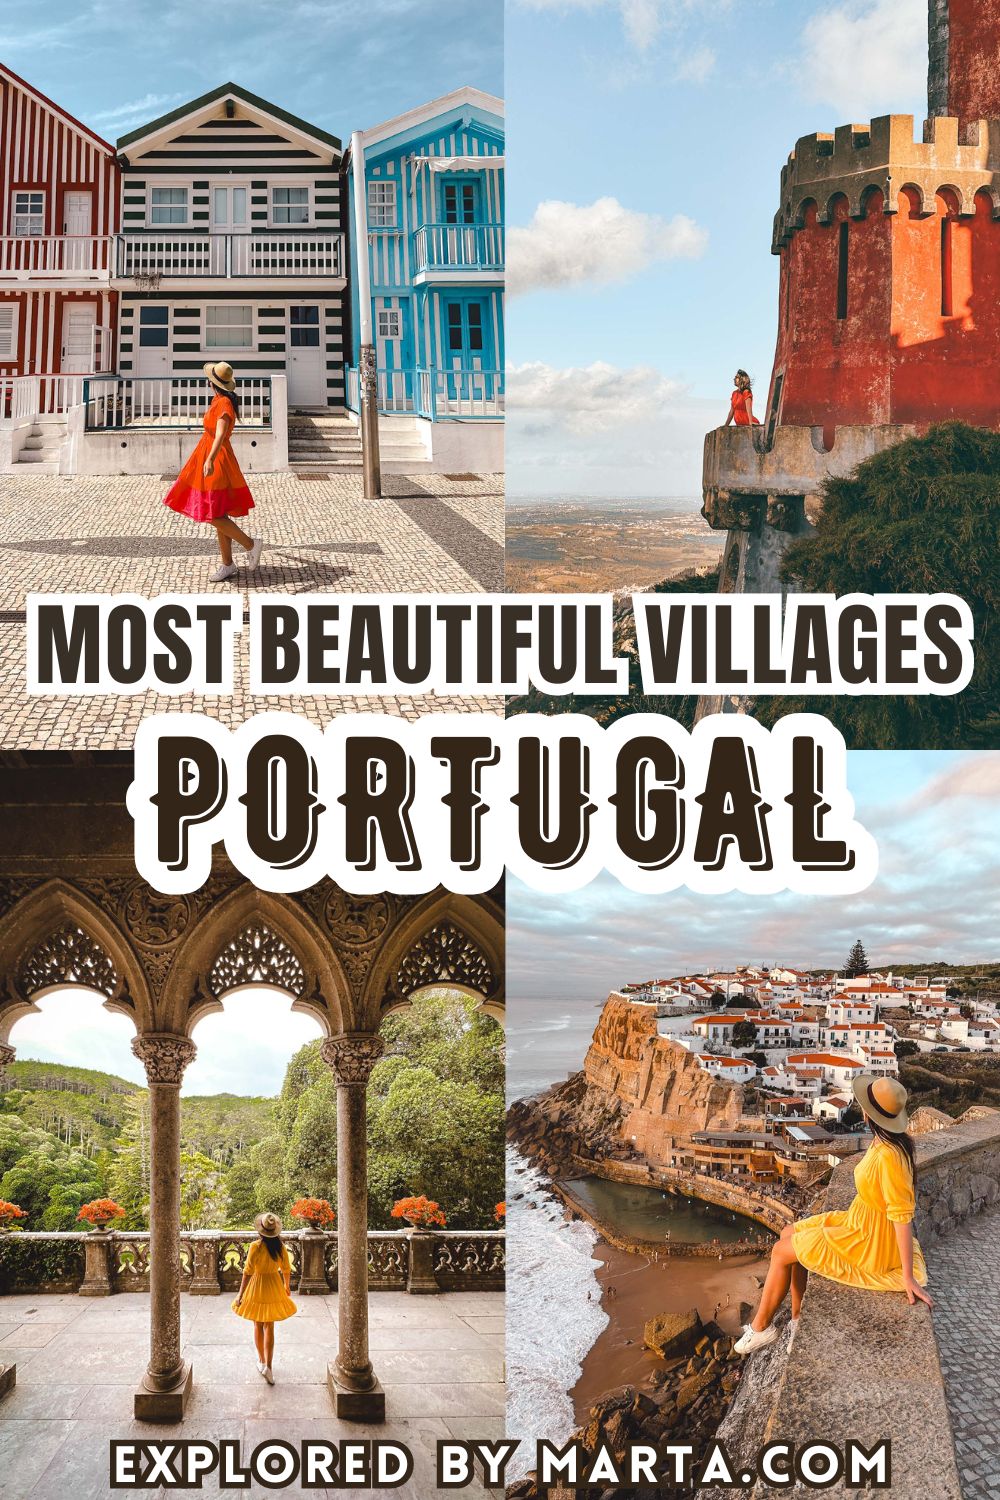 The most beautiful villages and small towns in Portugal